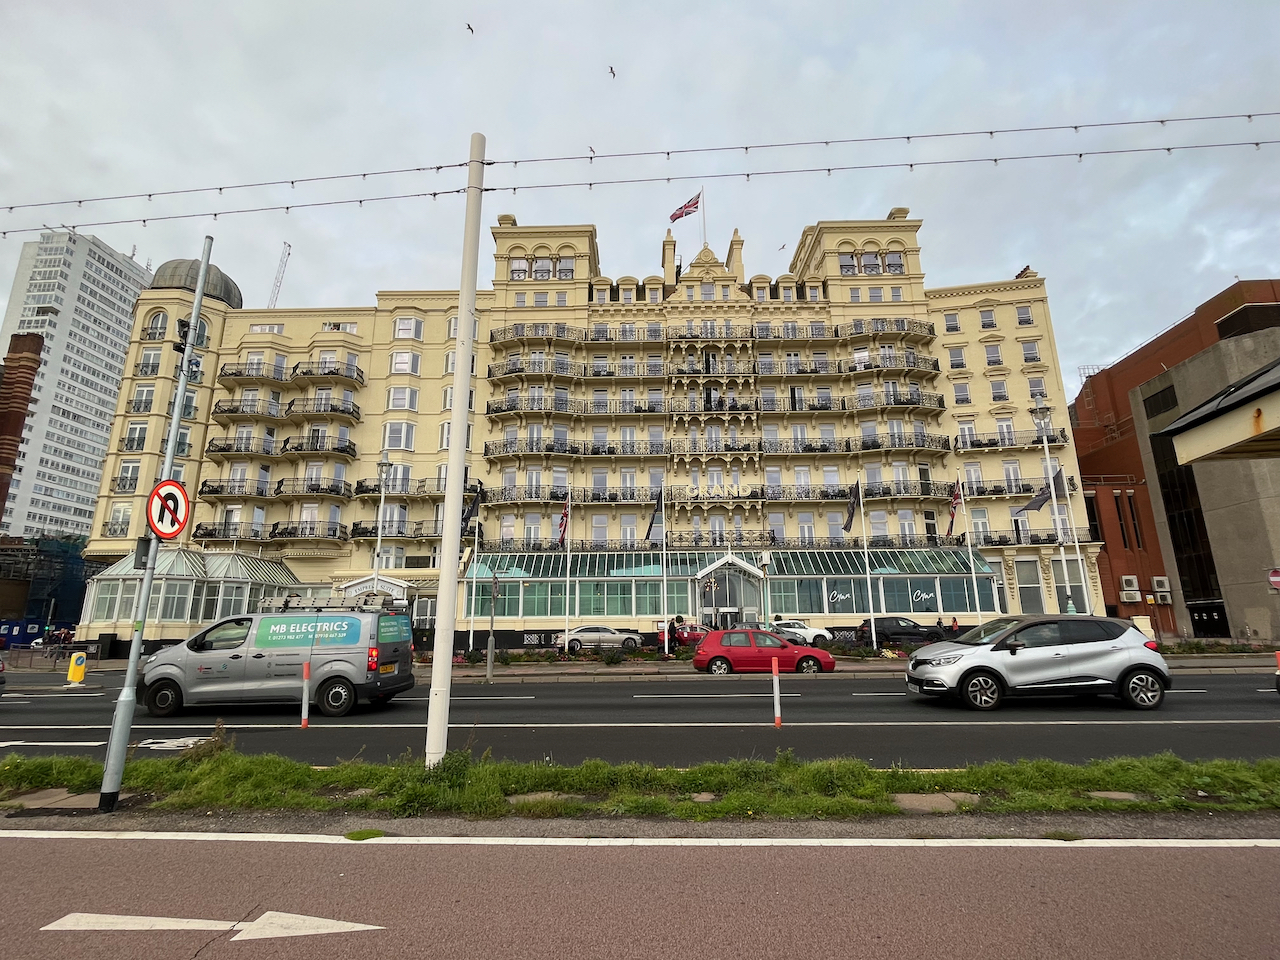 The majestic Brighton Grand Hotel, a very wide 9 storey building with a Union Jack flying on top.